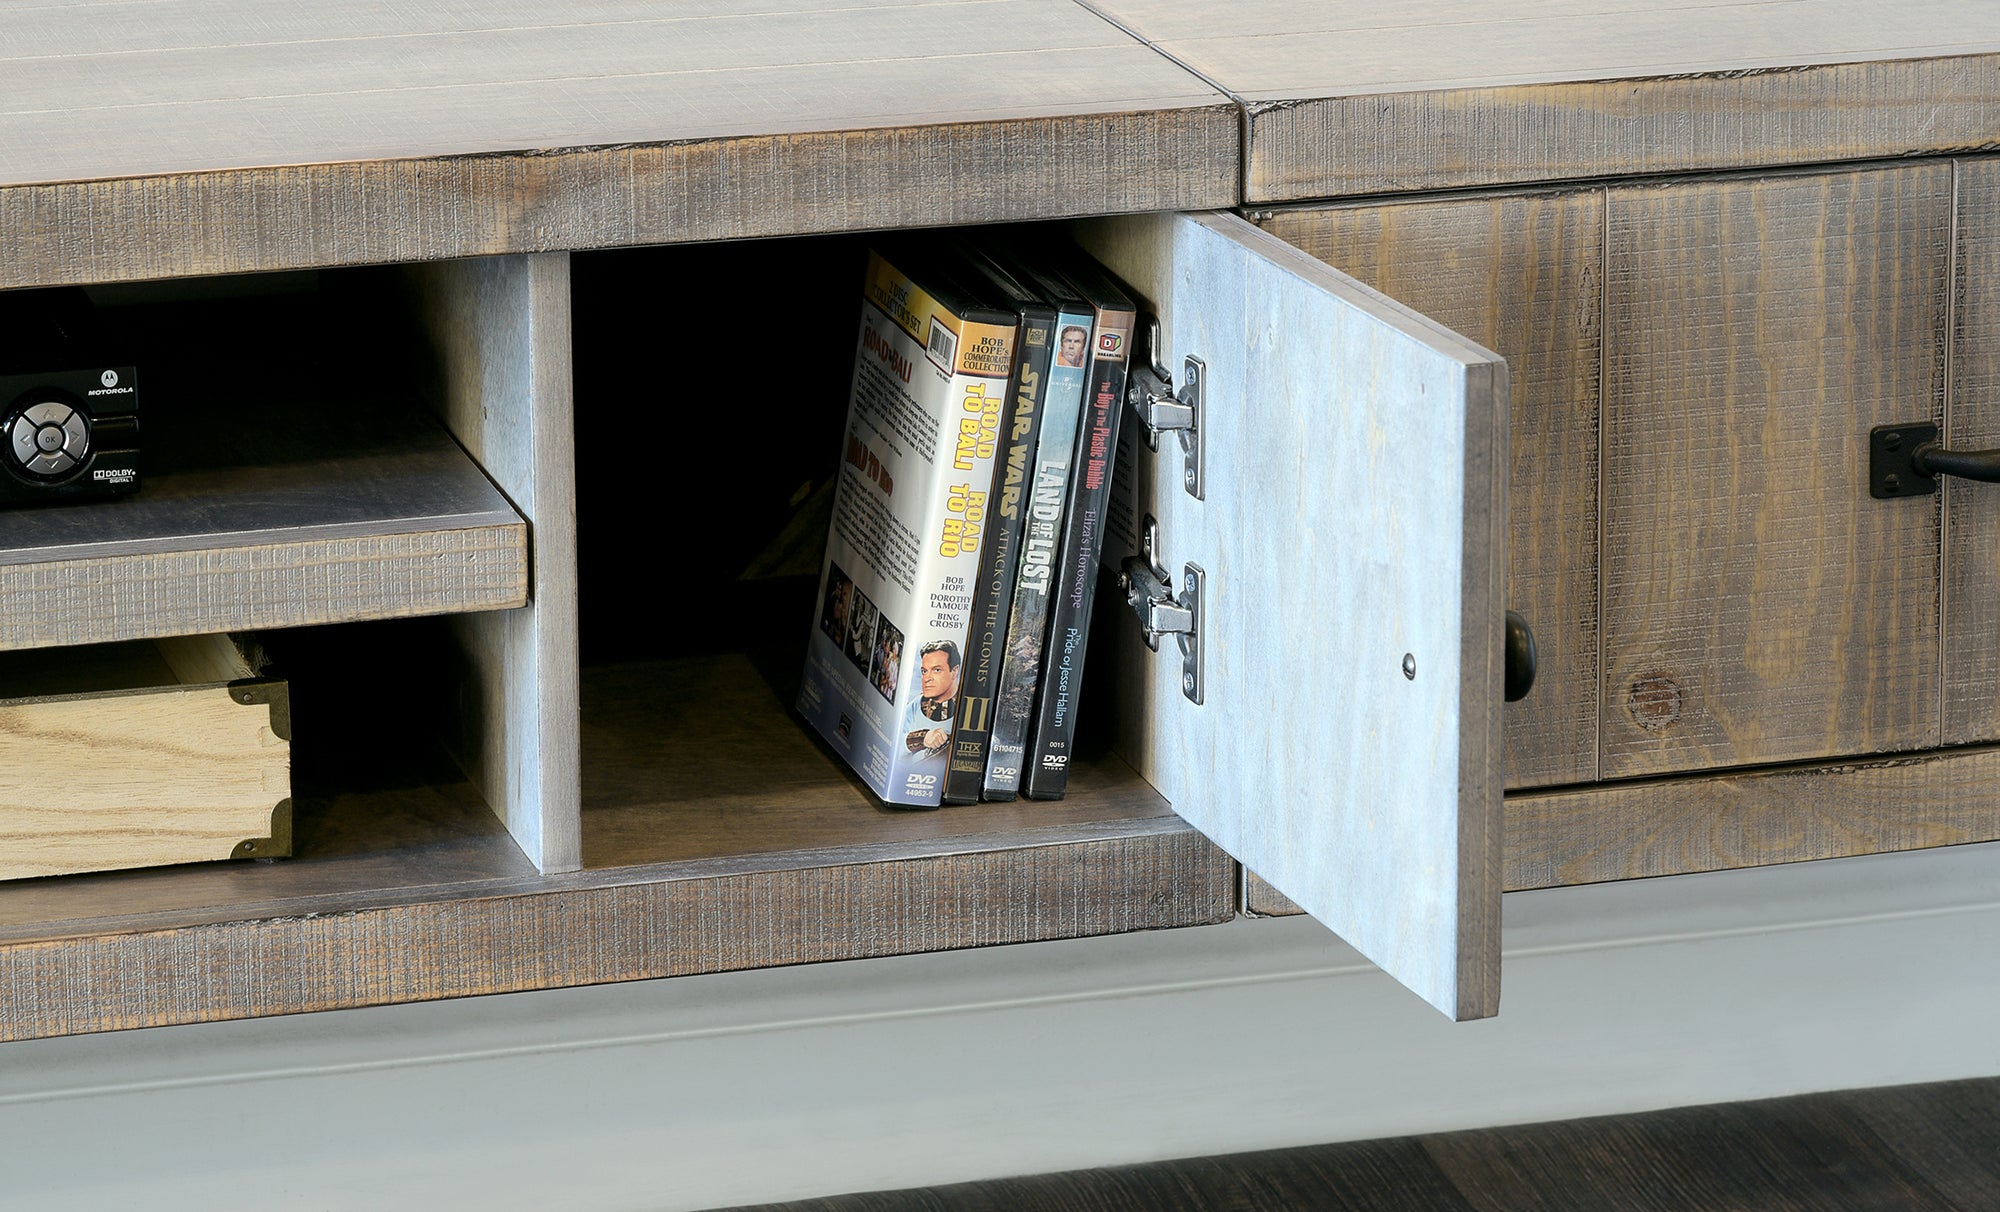 Gray Rustic Barn Wood Style Floating TV Stand Entertainment Center - Farmhouse - Lakewood